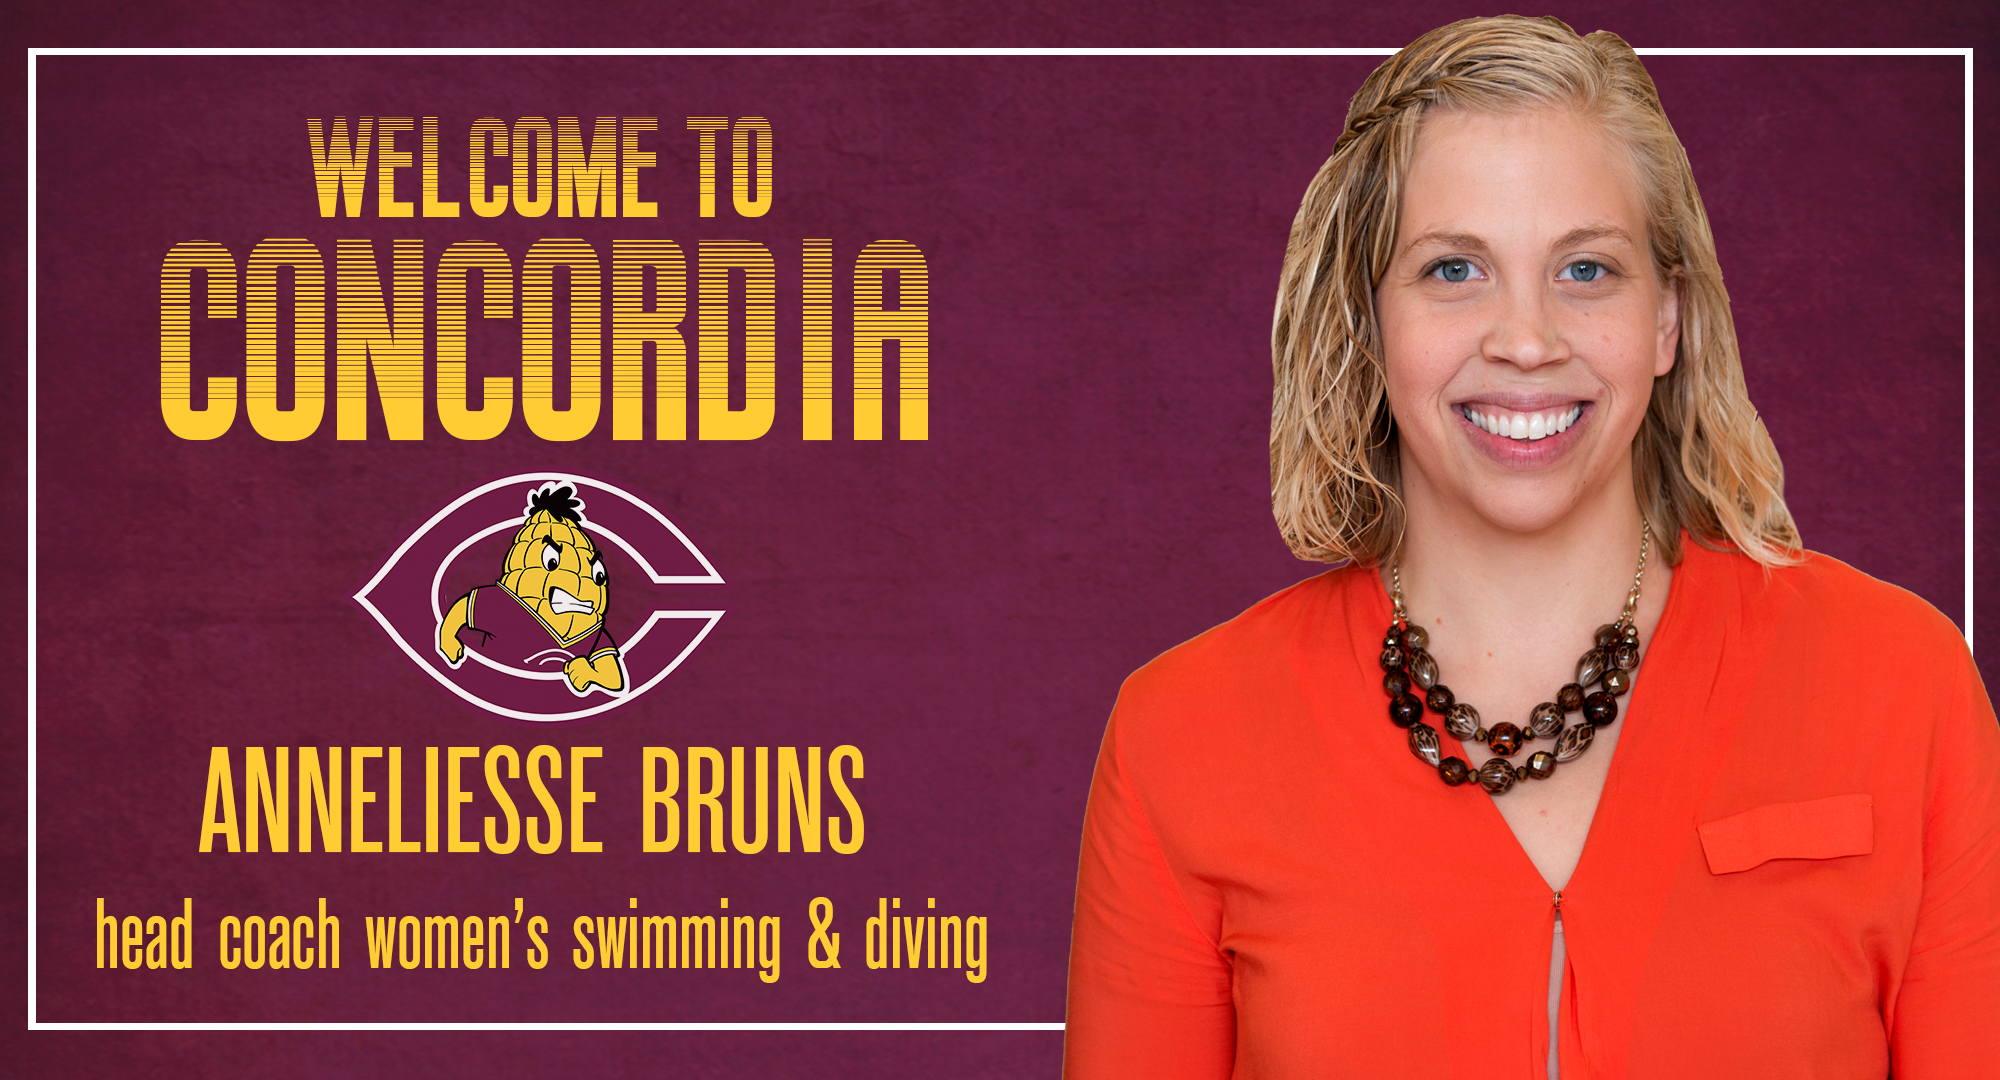 Annaliesse Bruns was named the head coach for the Cobber women's swimming and diving team.